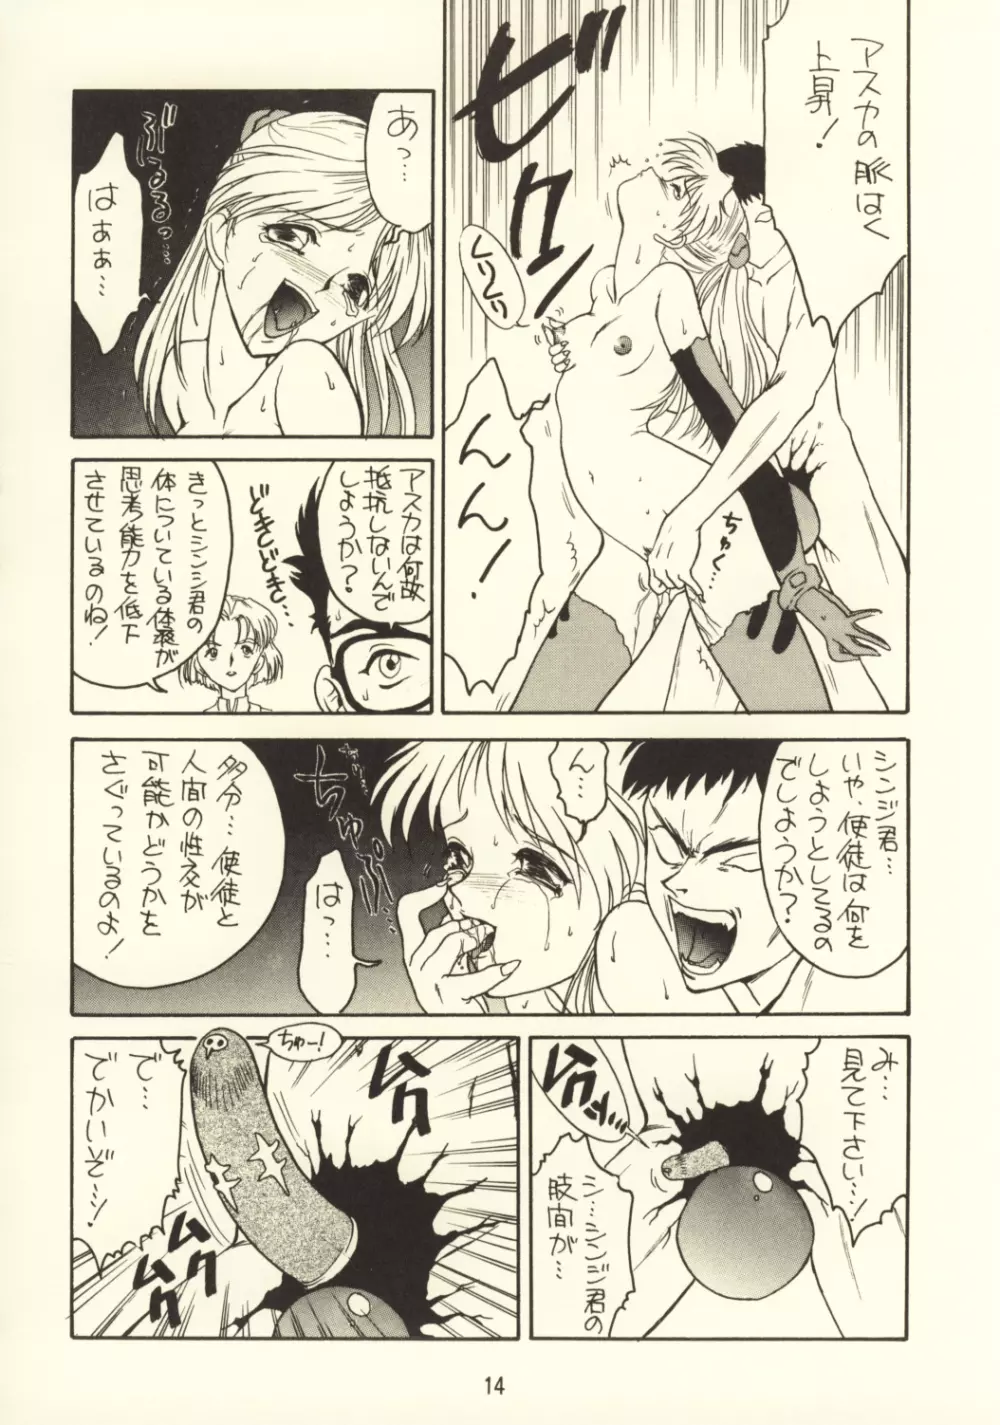 KITSCH 03rd Issue Page.16